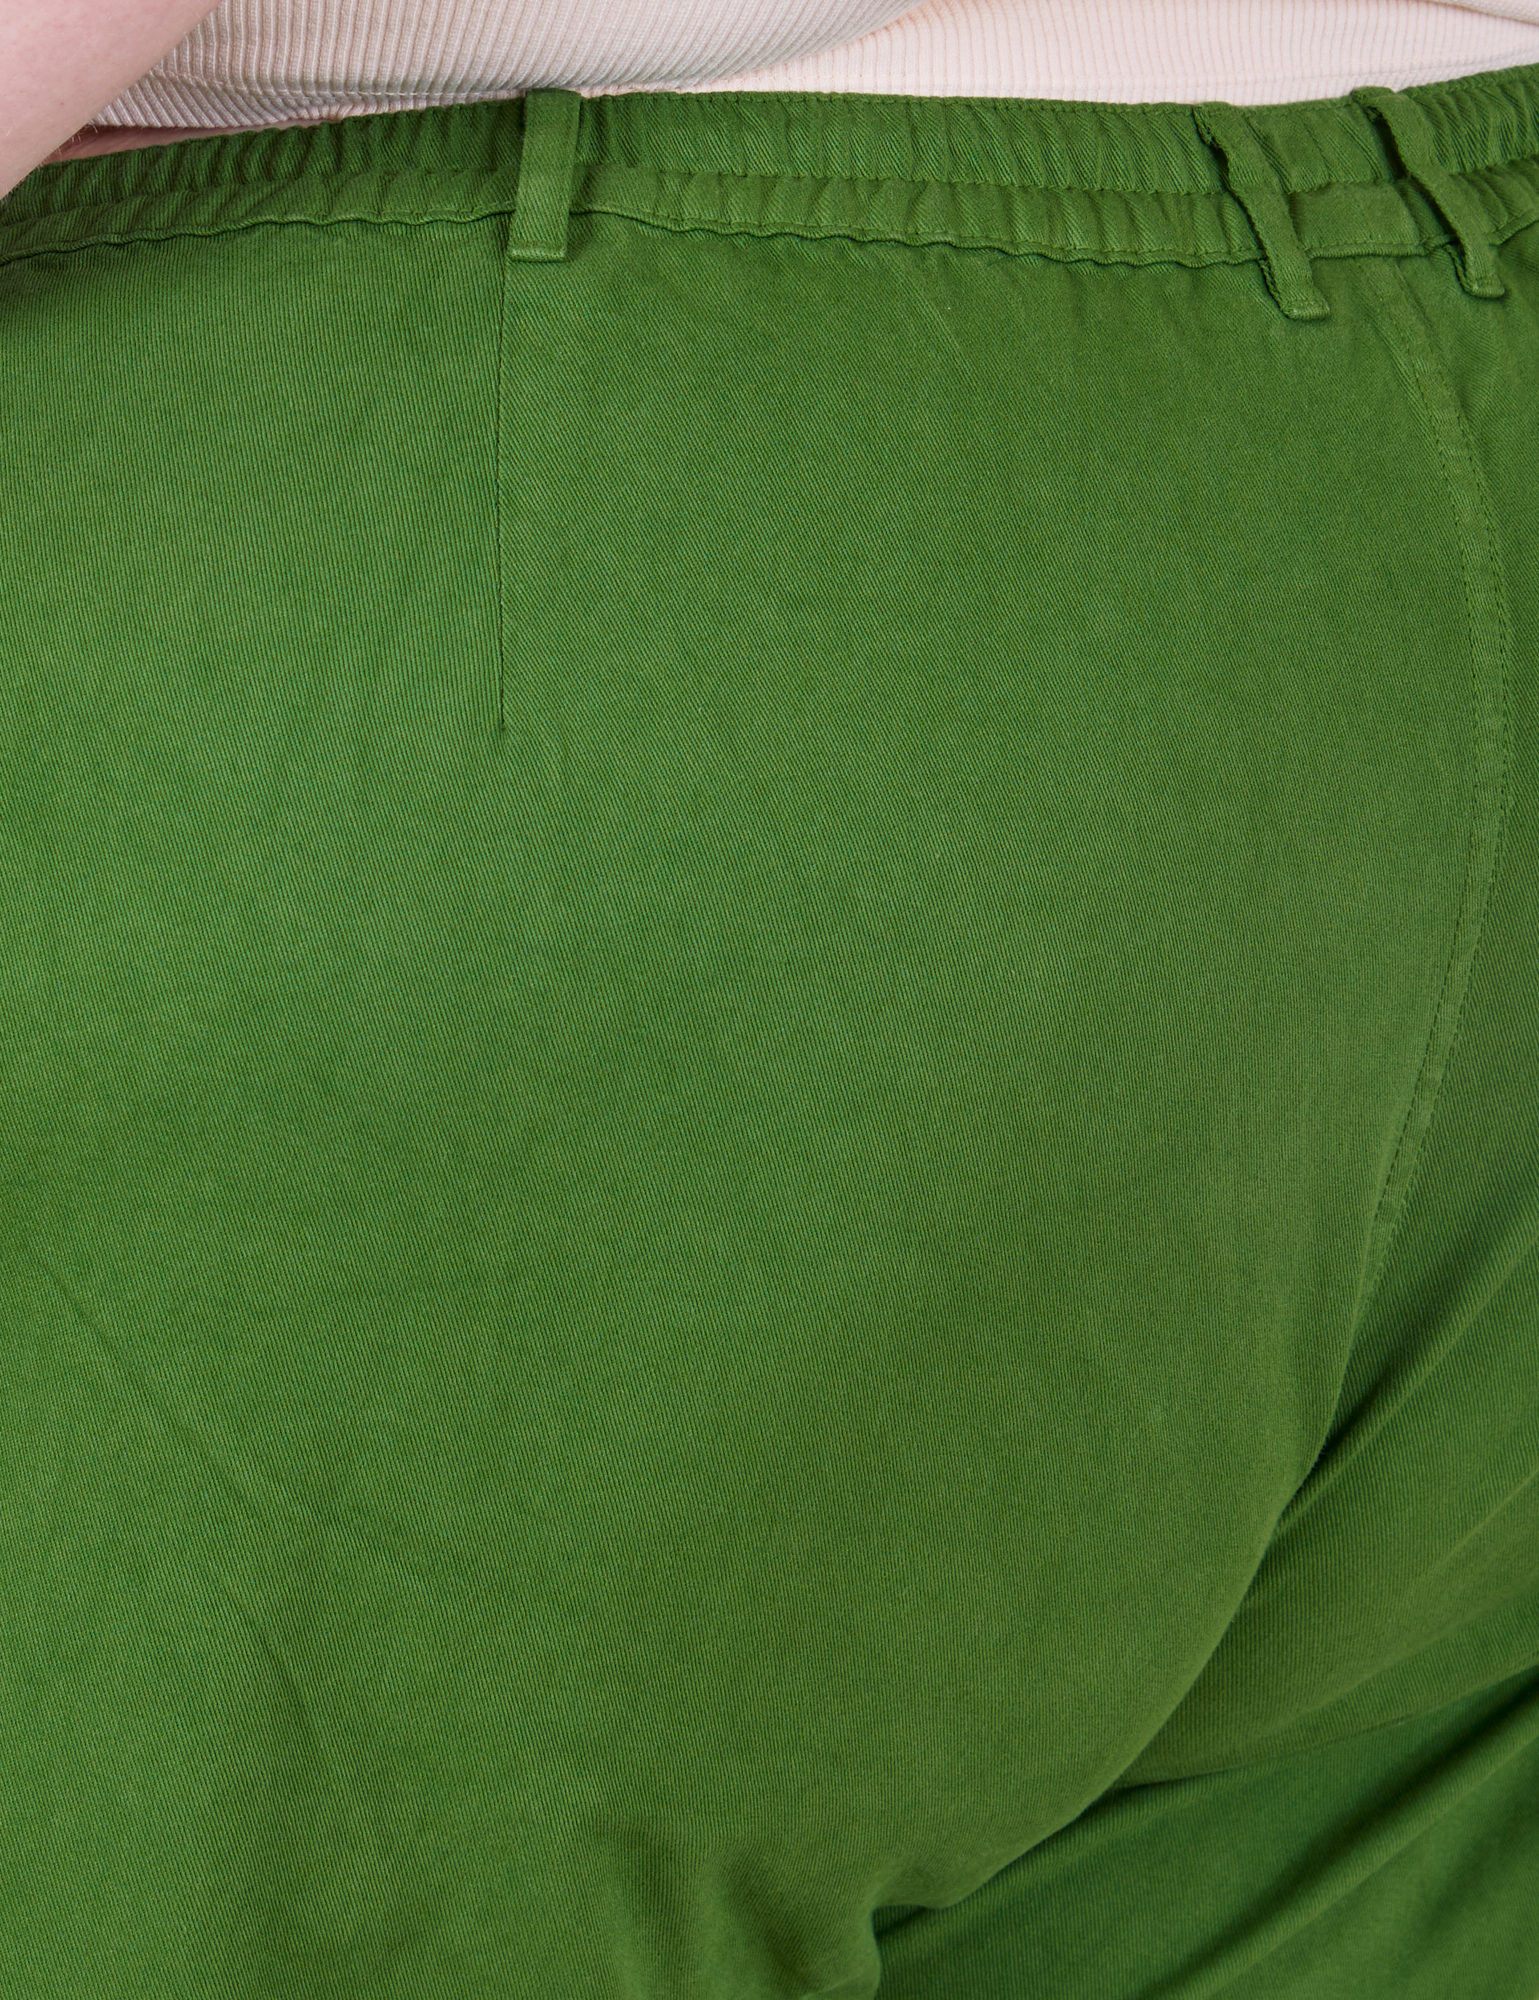 Back close up of Heavyweight Trousers in Lawn Green on Catie